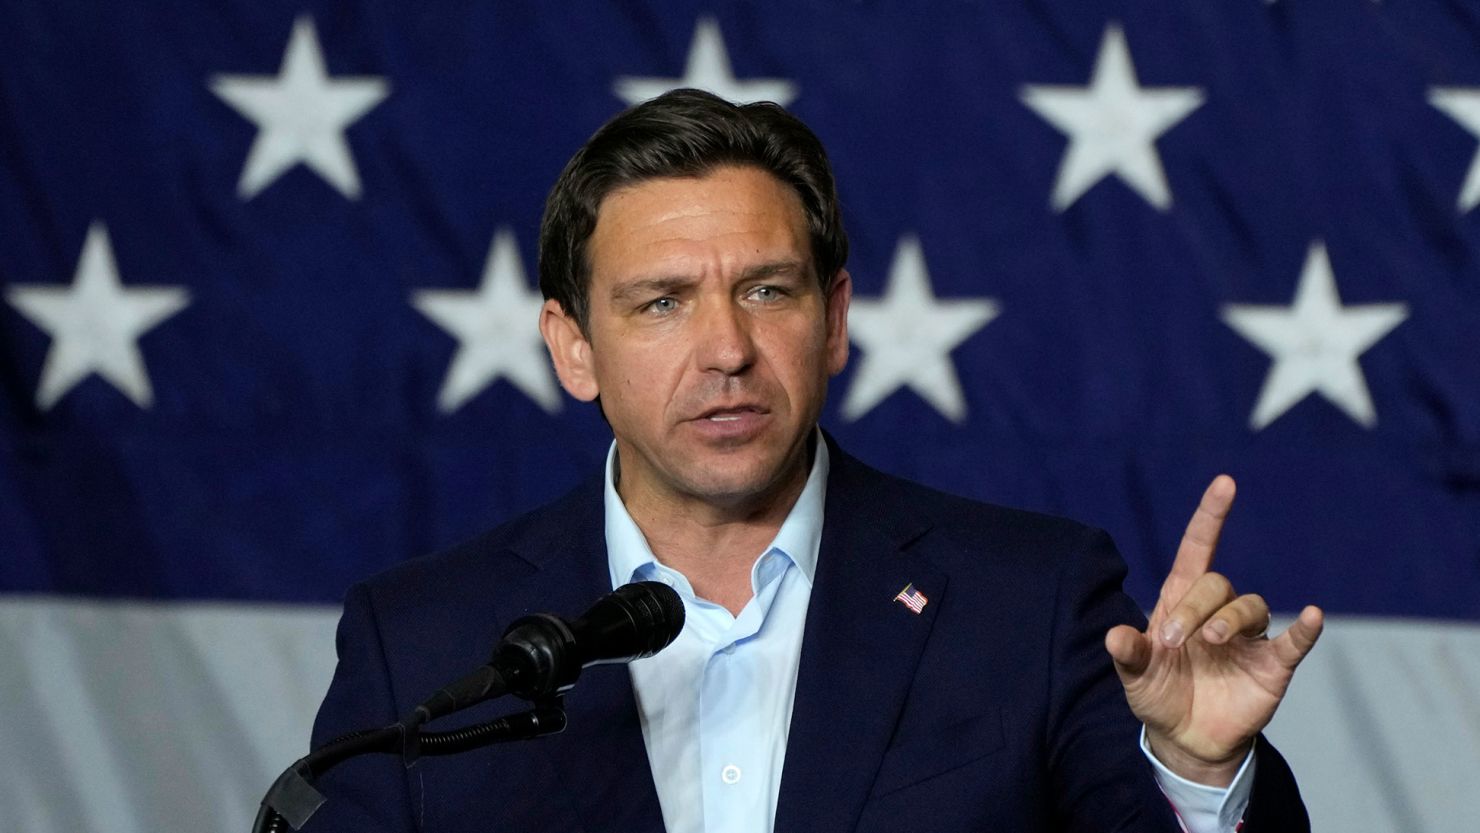 Republican presidential candidate Florida Gov. Ron DeSantis speaks during a fundraising event for Republican Rep. Ashley Hinson of Iowa on August 6, in Cedar Rapids, Iowa. DeSantis passed a law in May restricting transgender access to treatments and bathrooms.